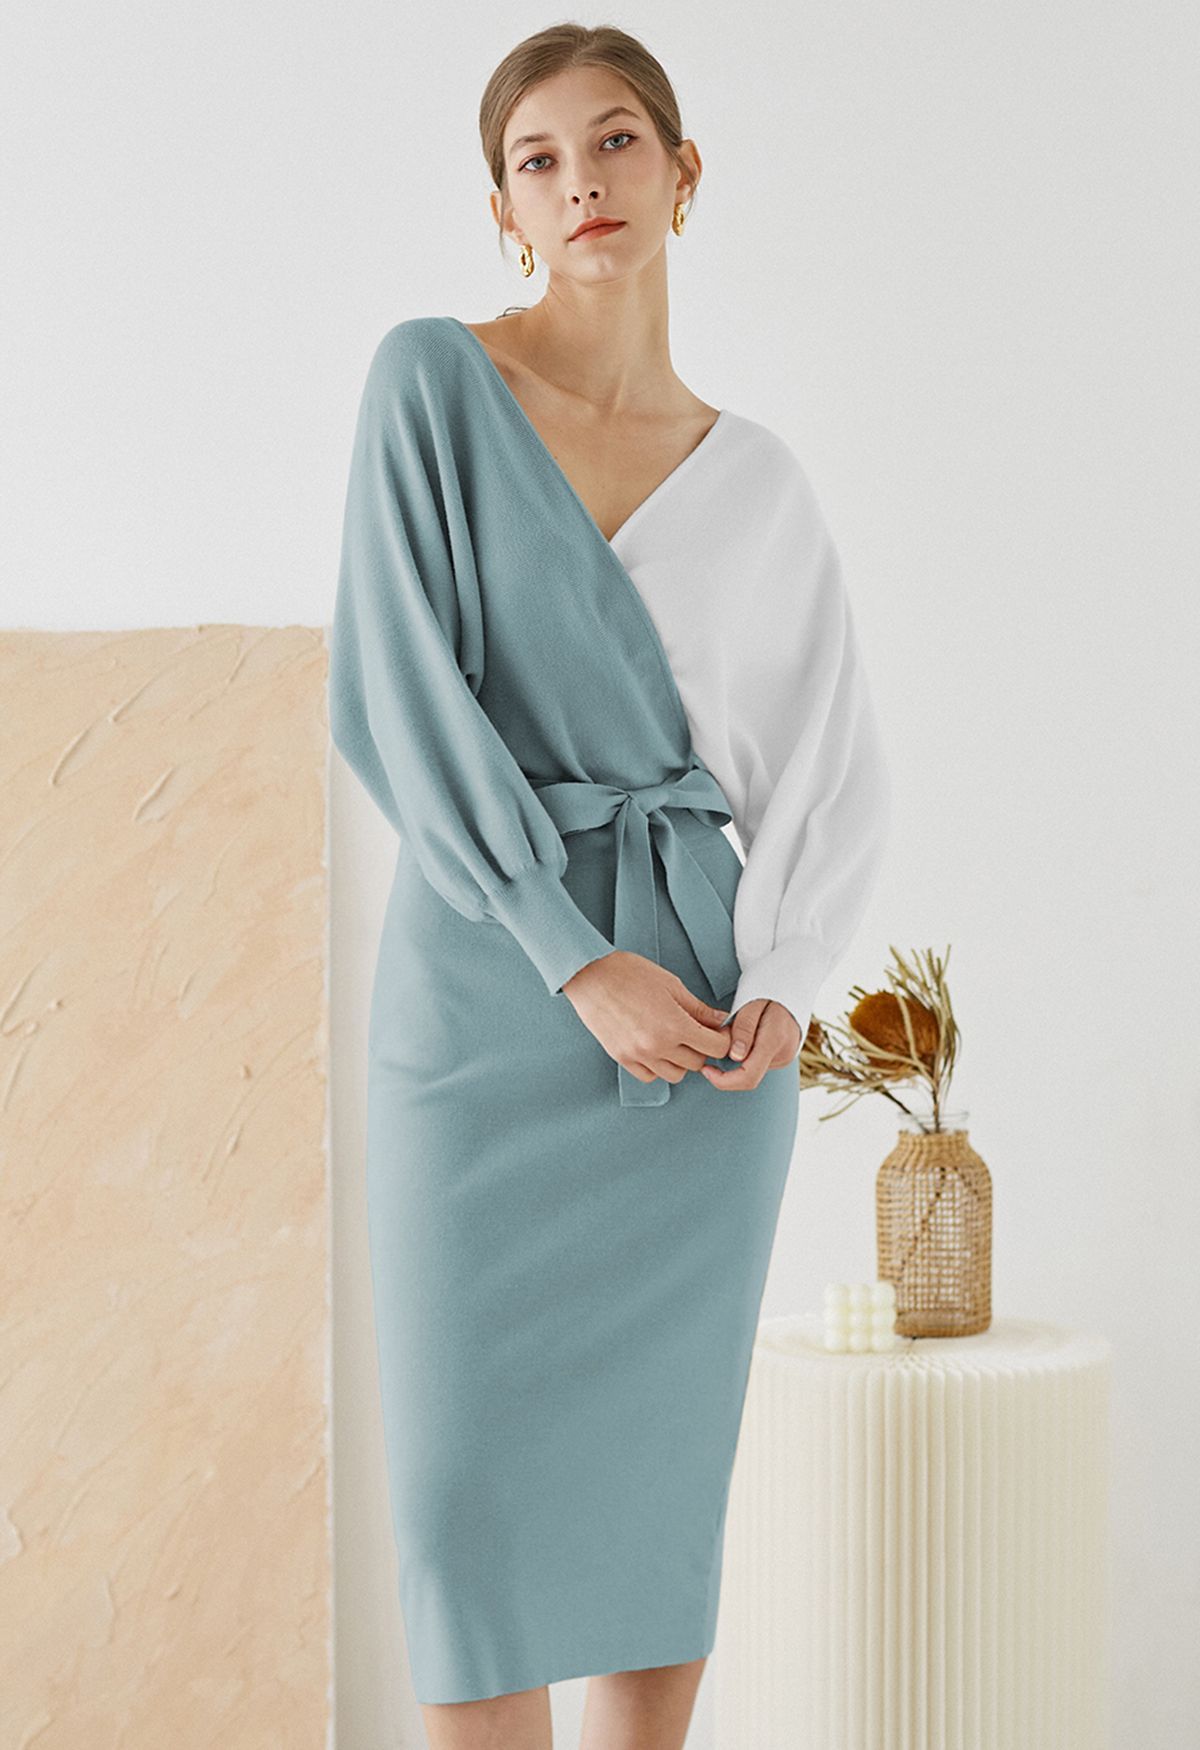 Tie Bow Two-Tone Knit Wrap Midi Dress in Teal | Chicwish